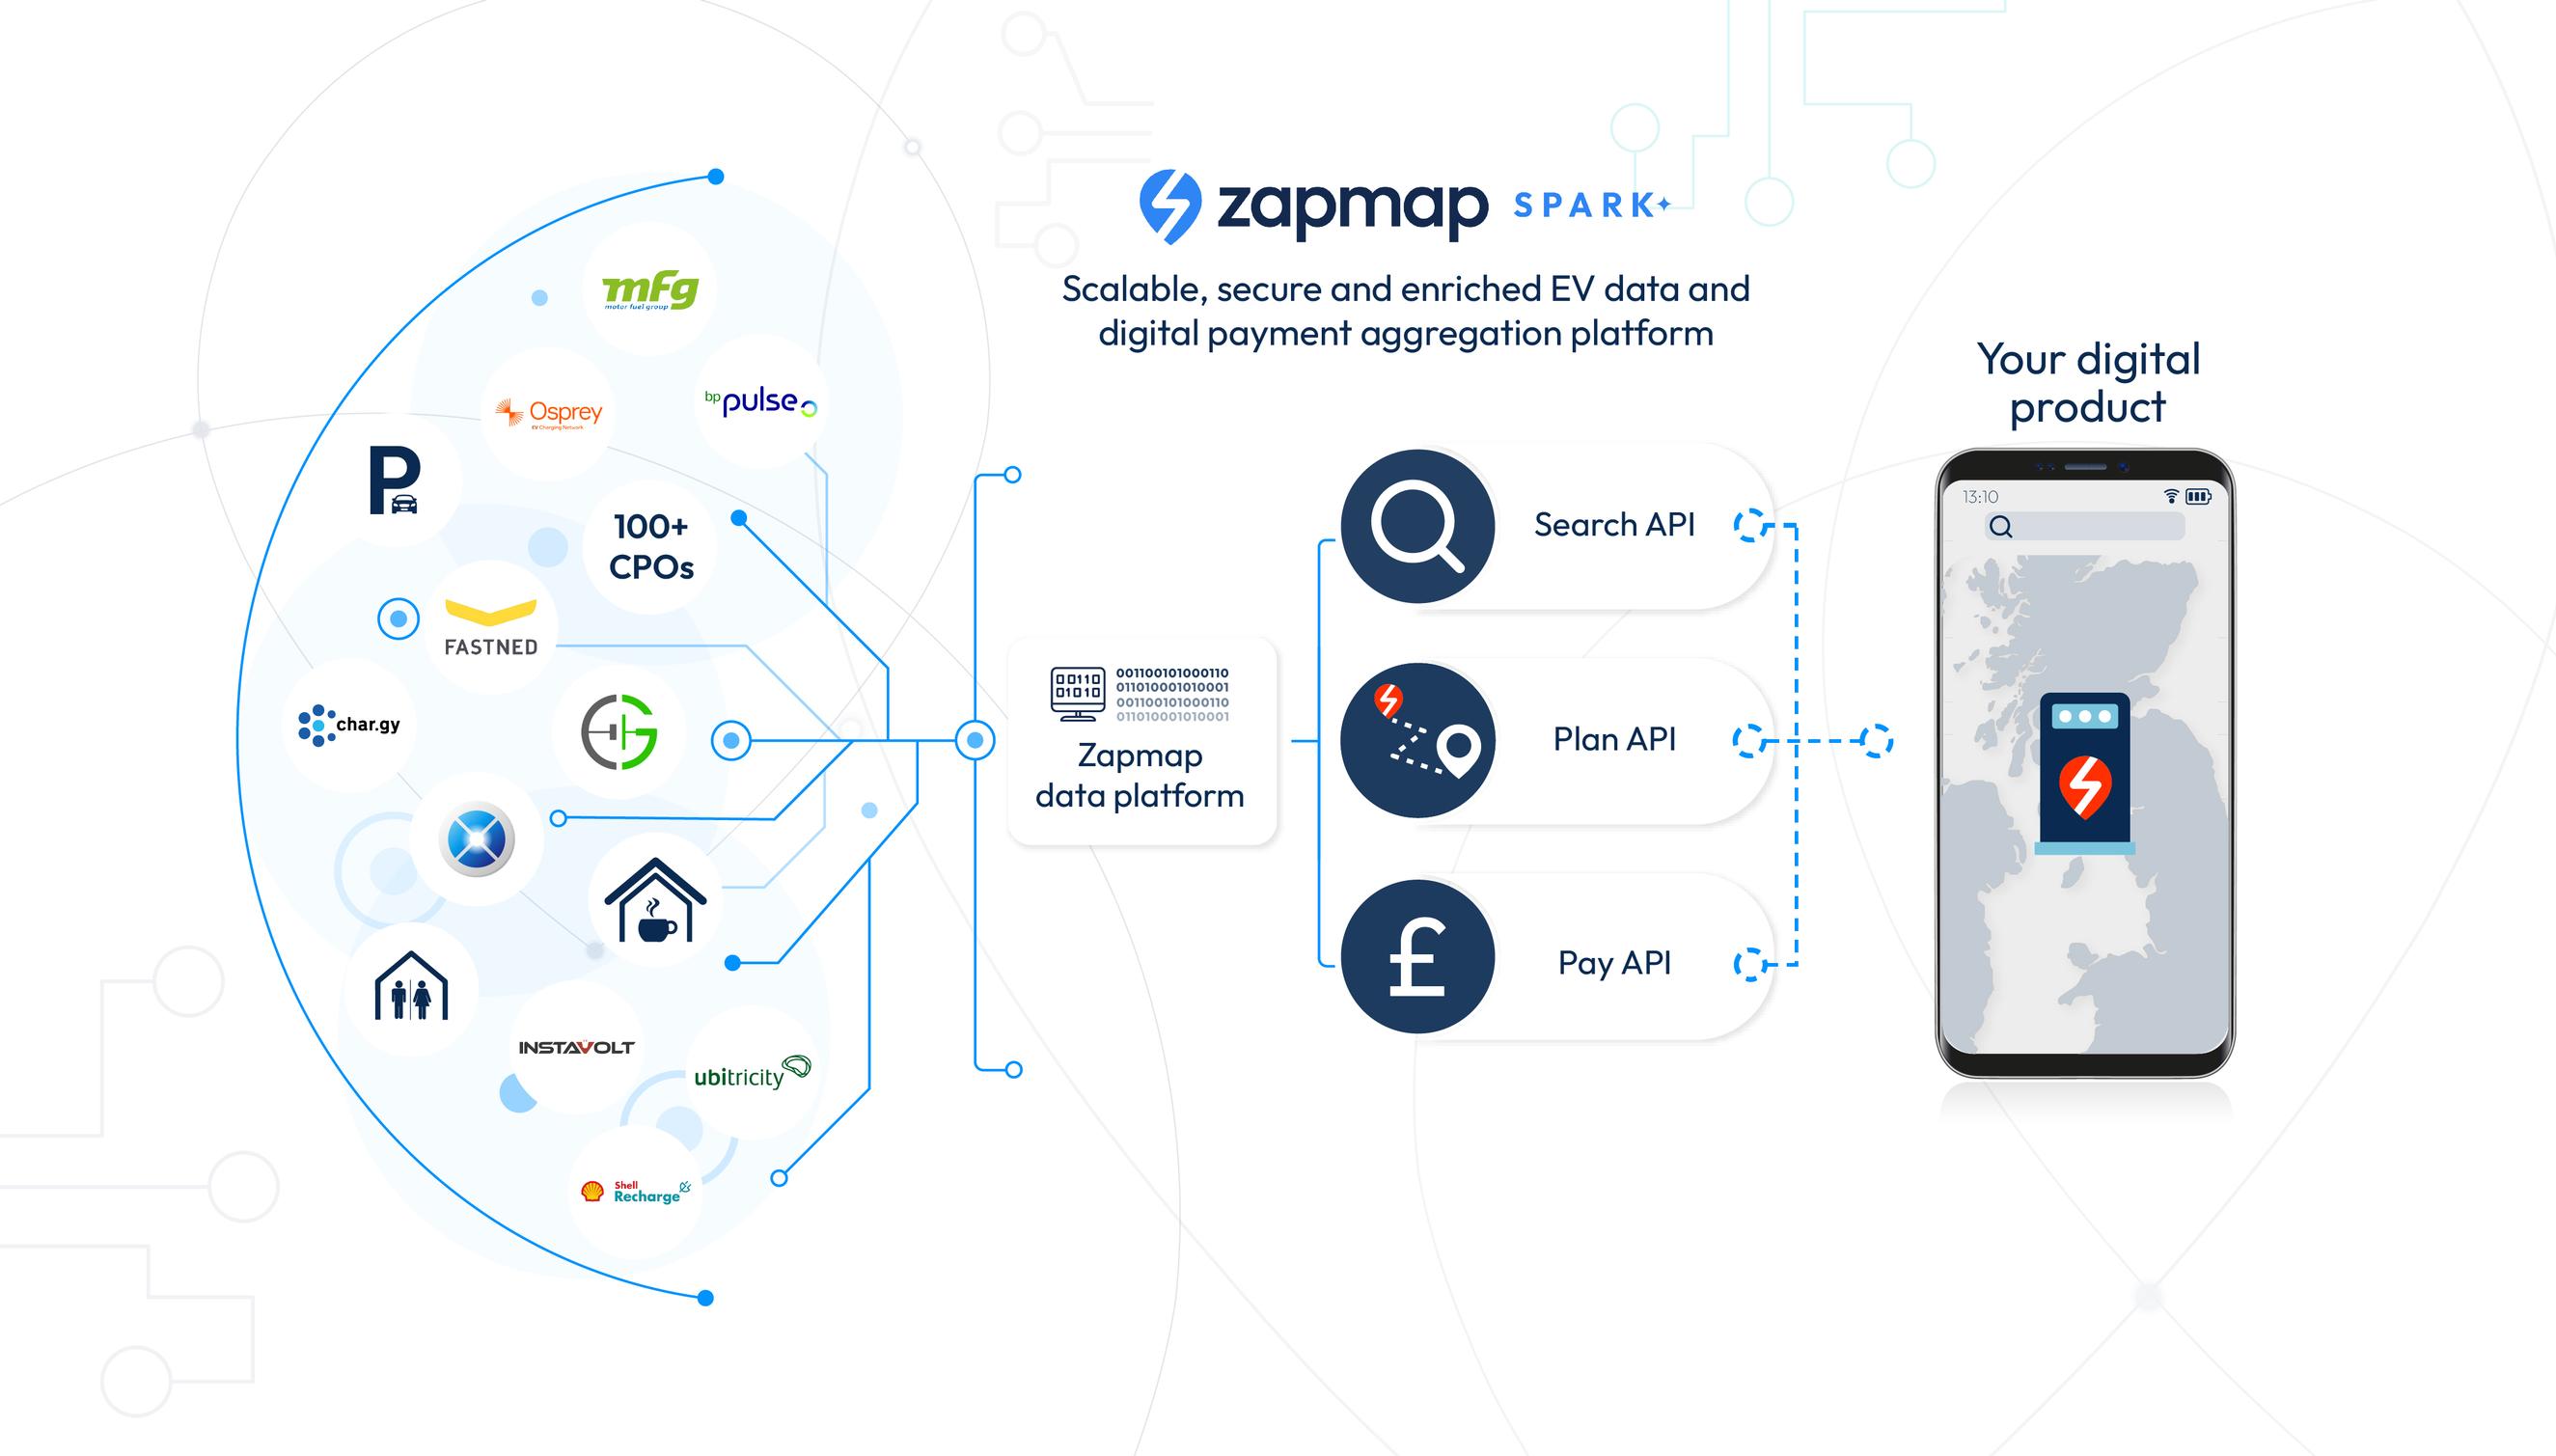 Zapmap launches Spark to support companies’ shift to electric vehicles